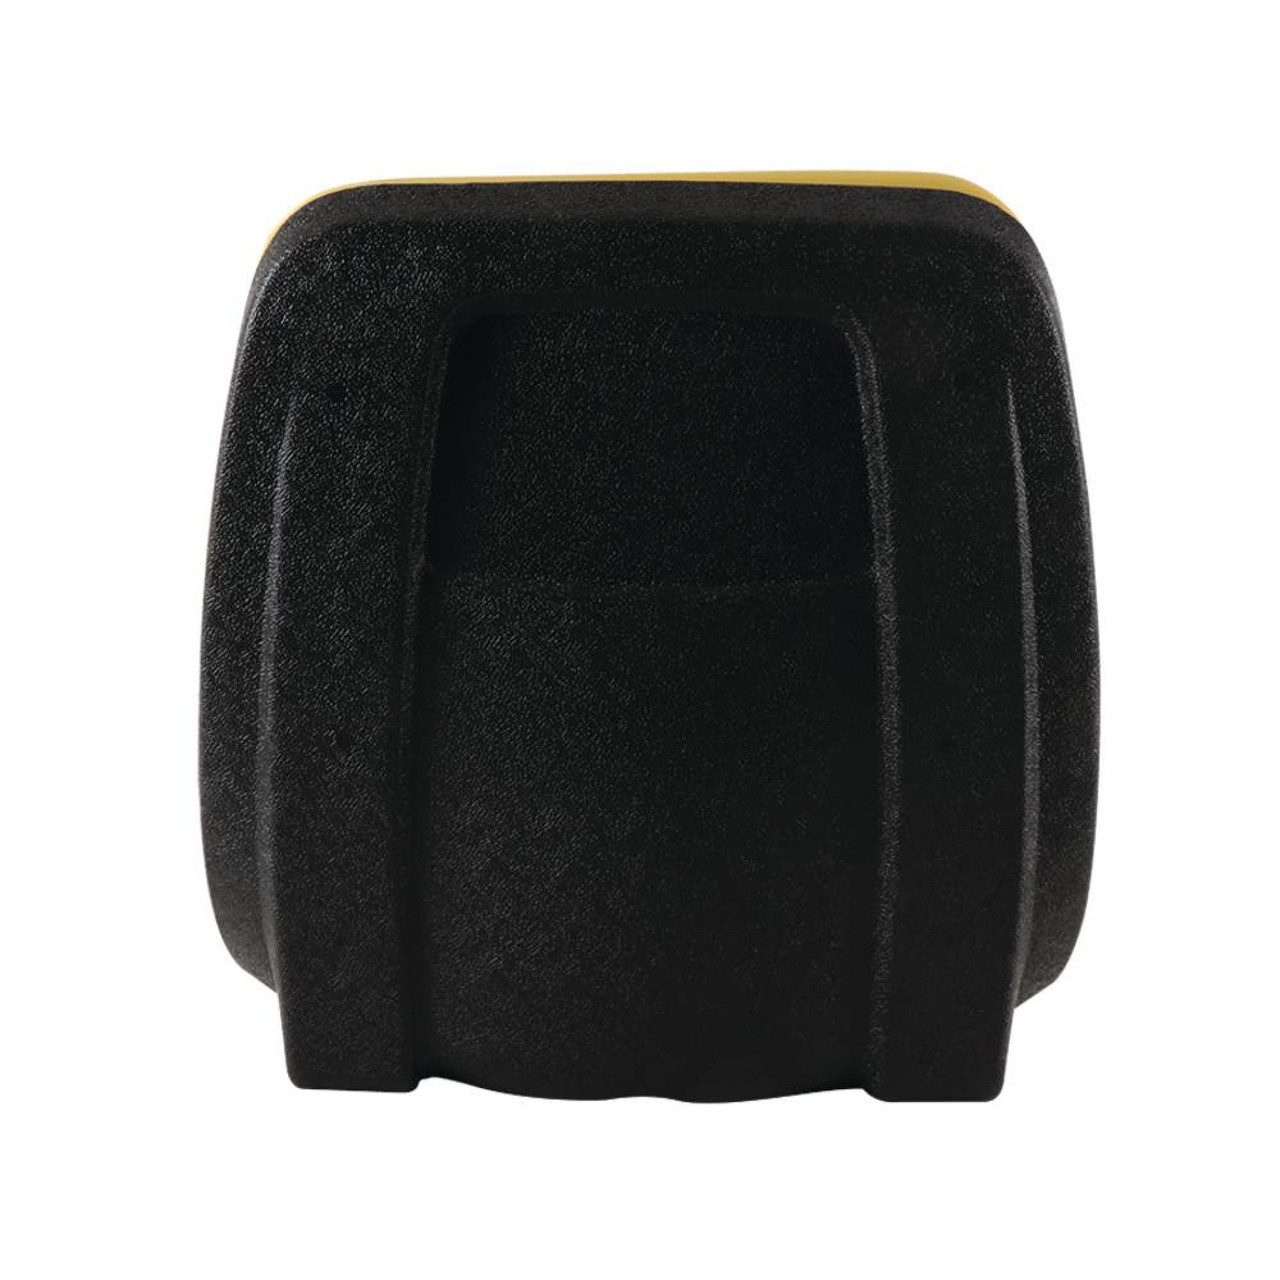 Complete Tractor Seat for Universal Products